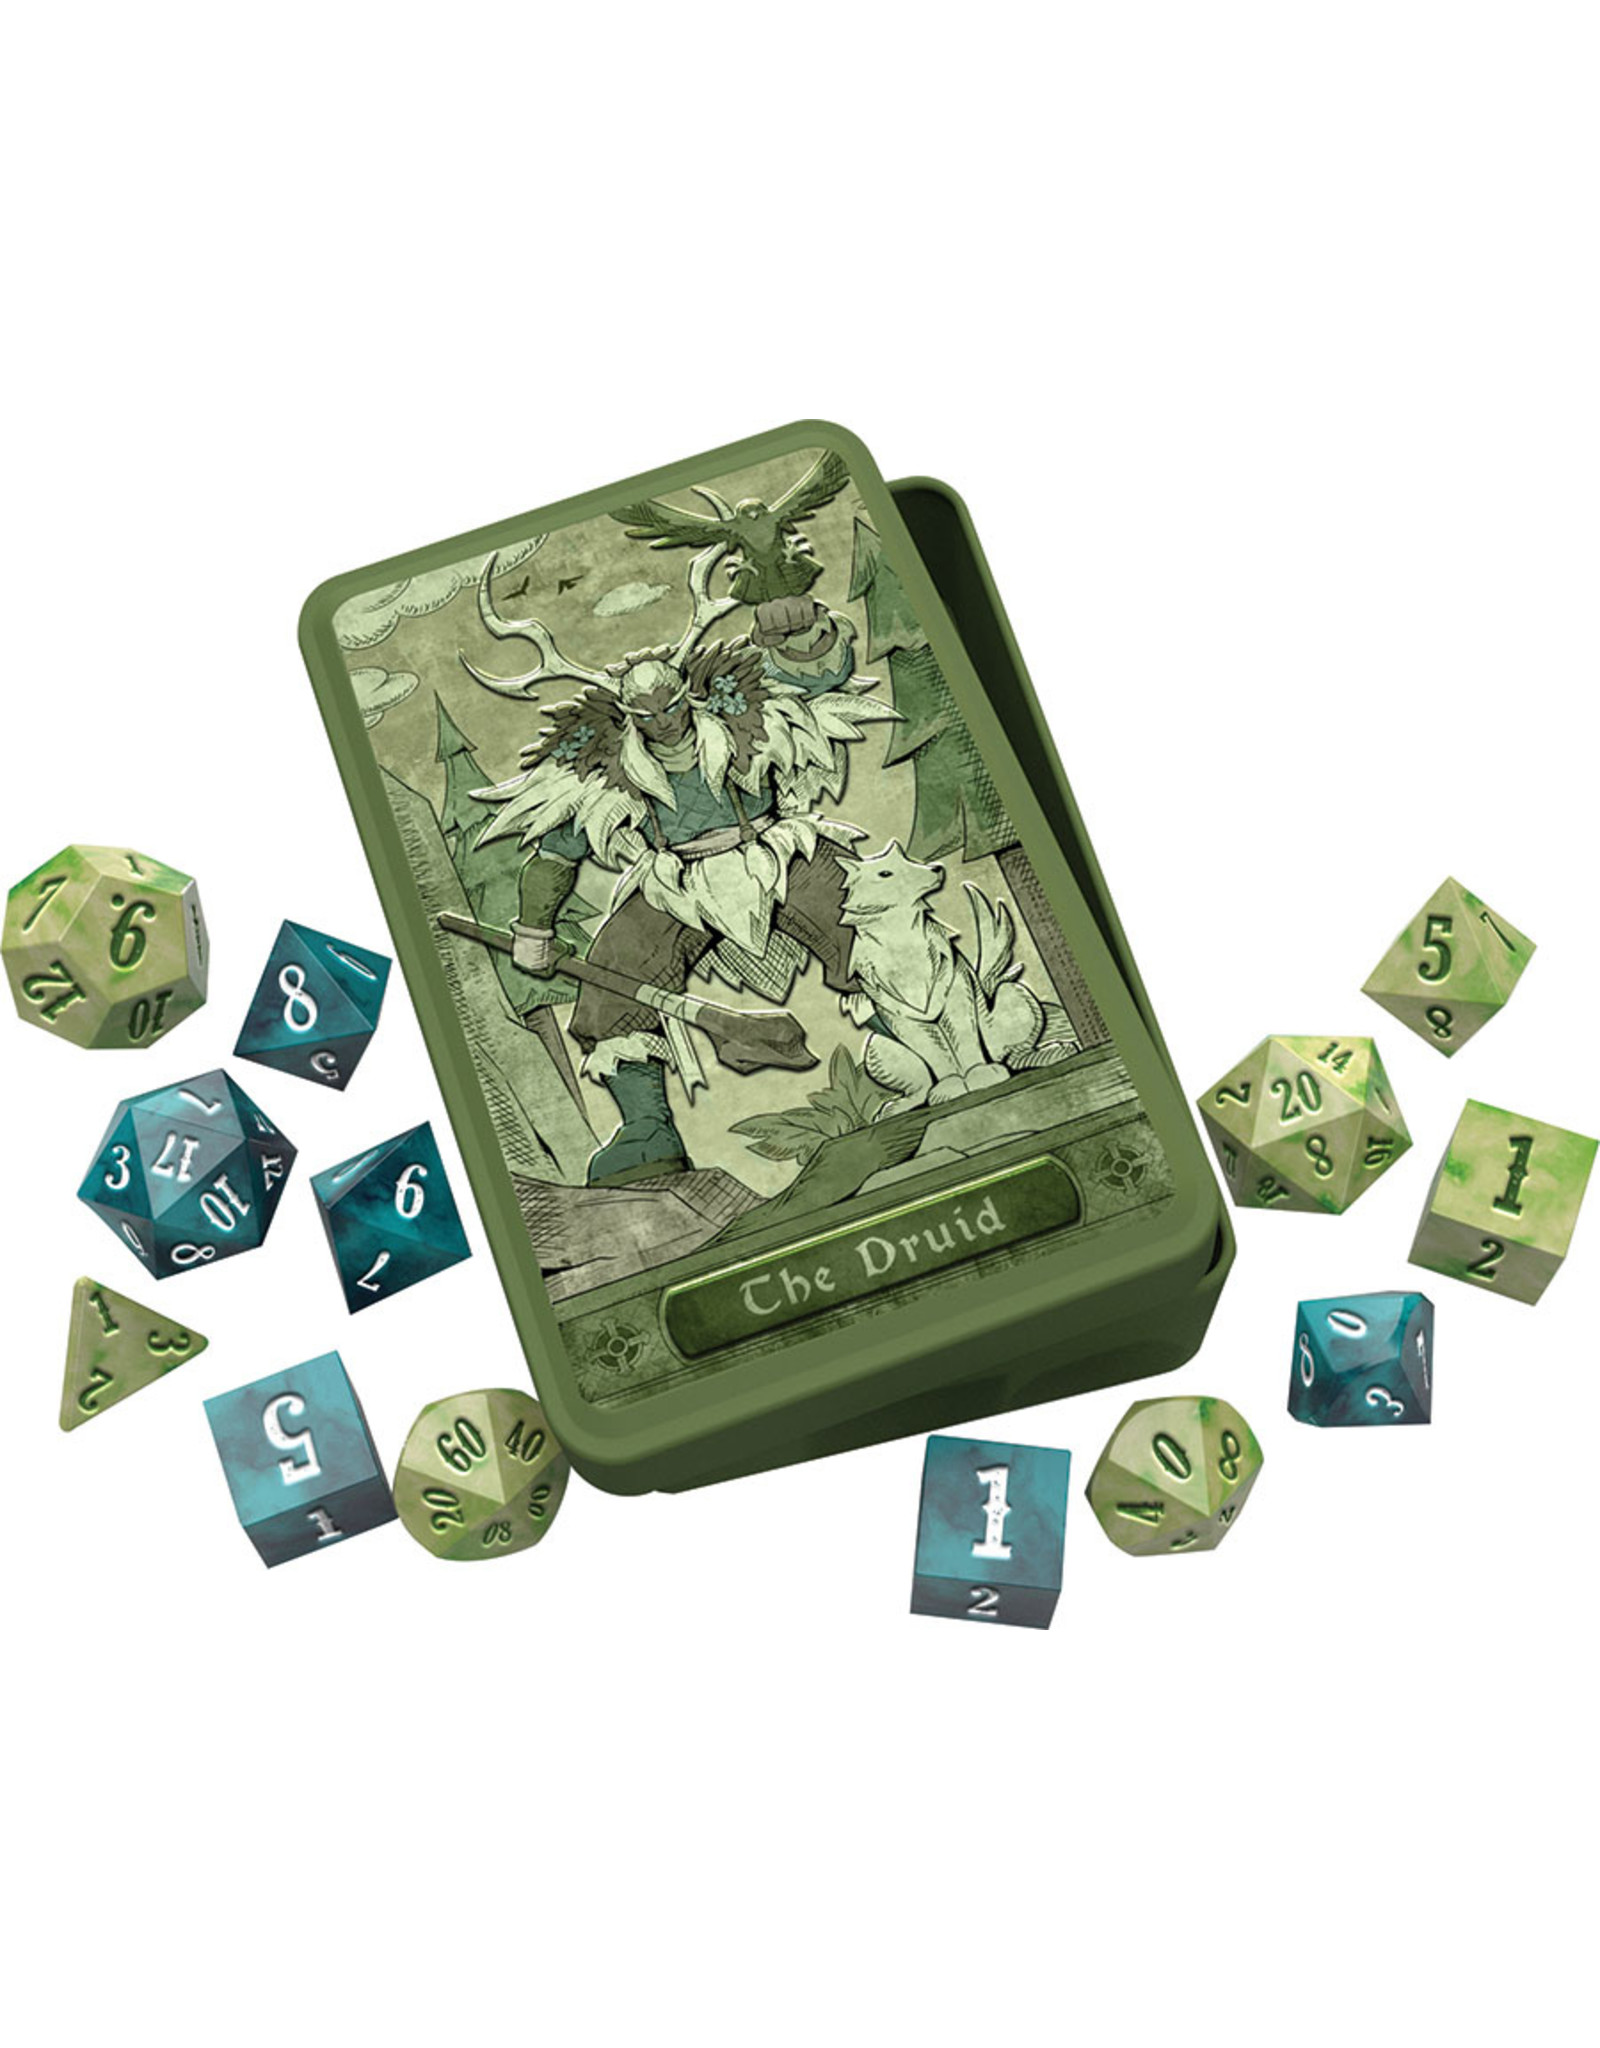 Beadle & Grimm's Class-Specific Dice Sets